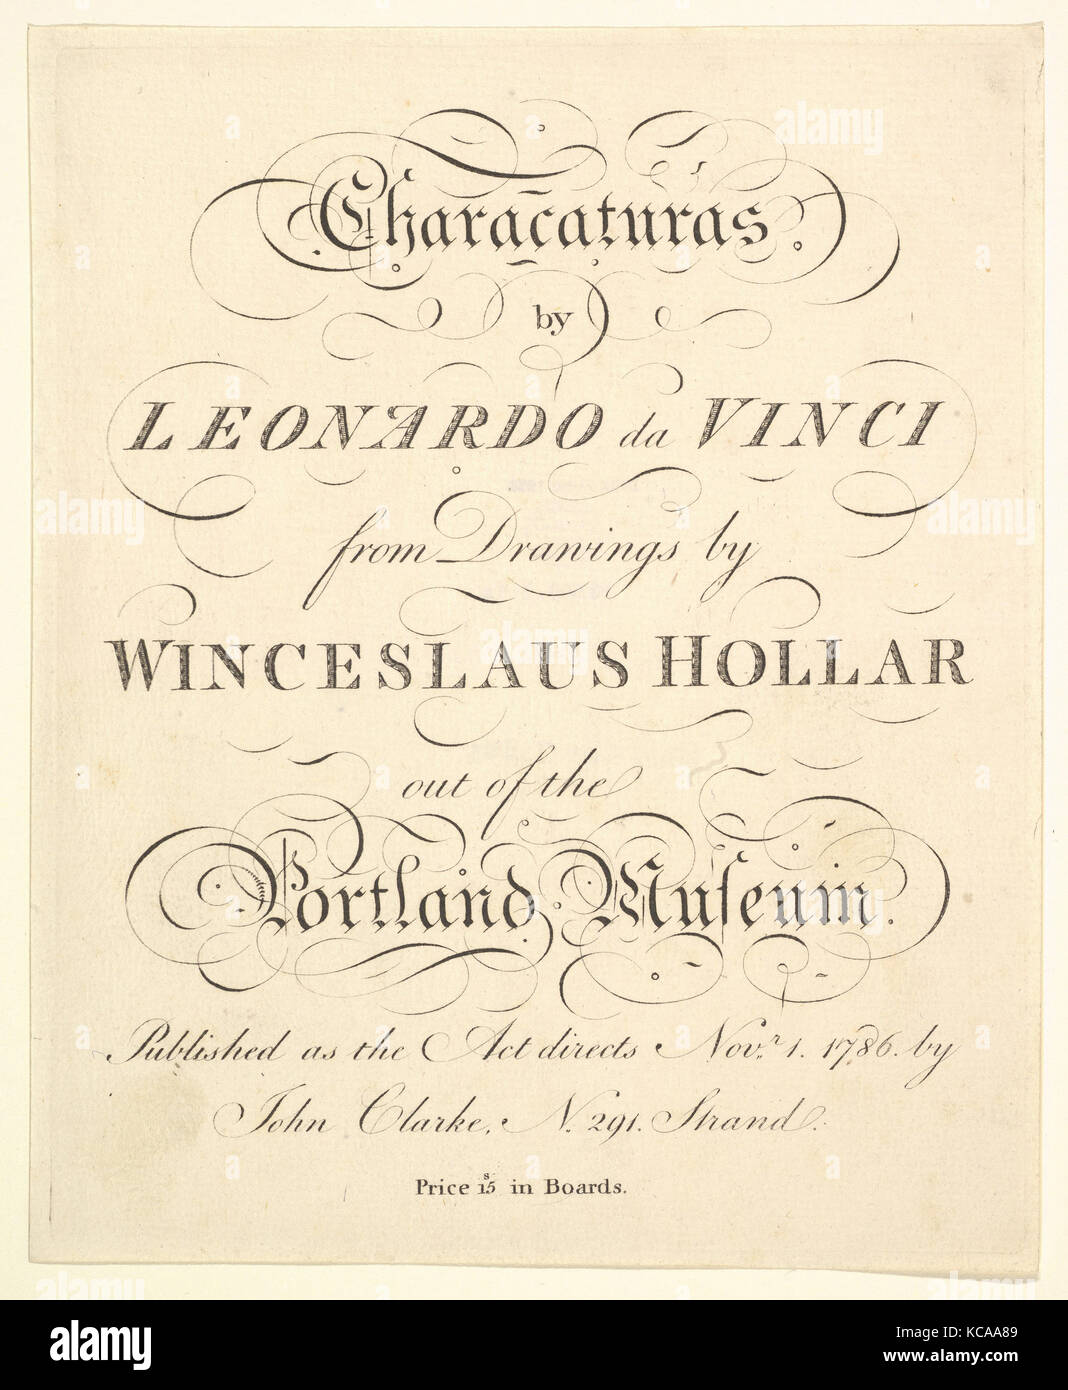 Title Page: Characaturas by Leonardo da Vinci, from Drawings by Wincelslaus Hollar, out of the Portland Museum Stock Photo